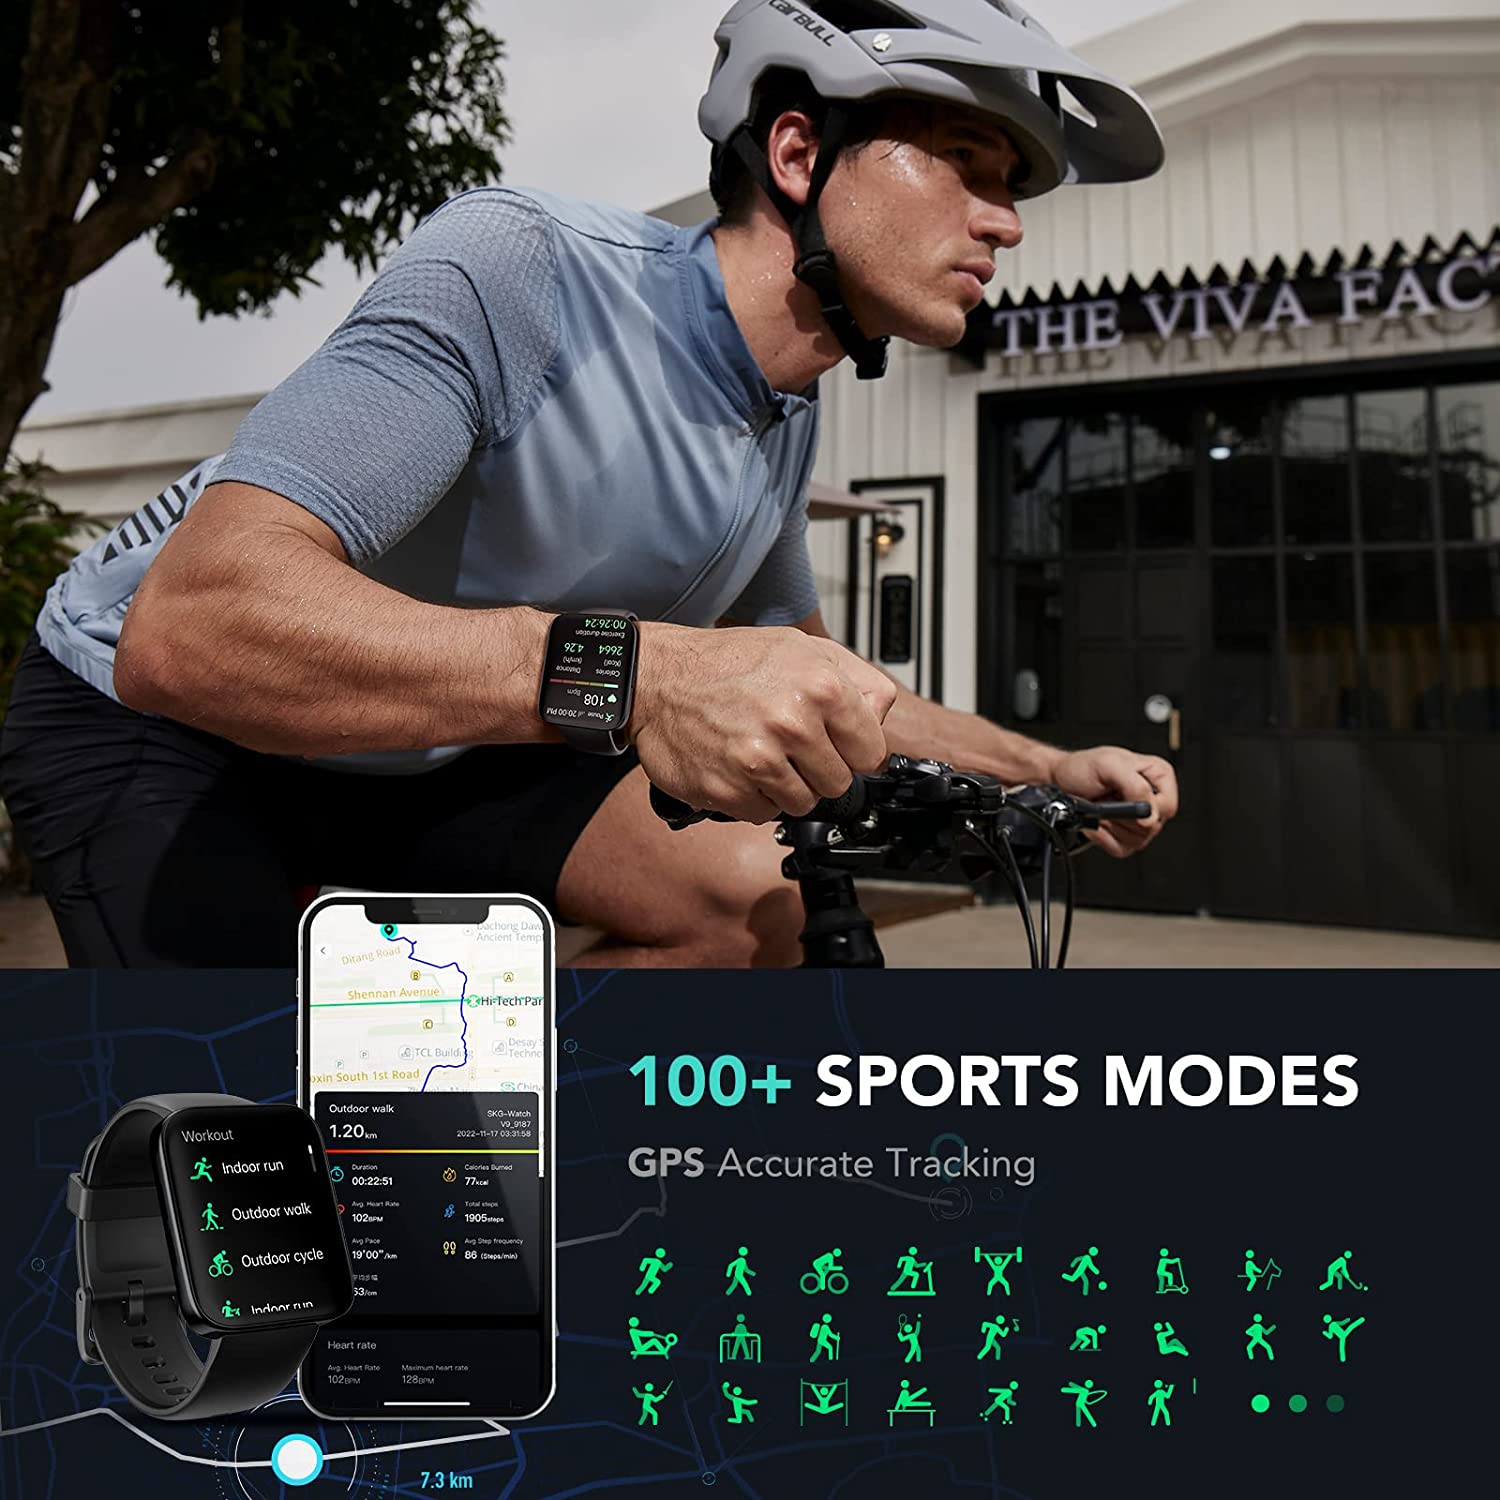 LTE-M smart watch provides GPS location, SOS, and heart rate monitoring  solution for athlete performance and safety applications - nordicsemi.com